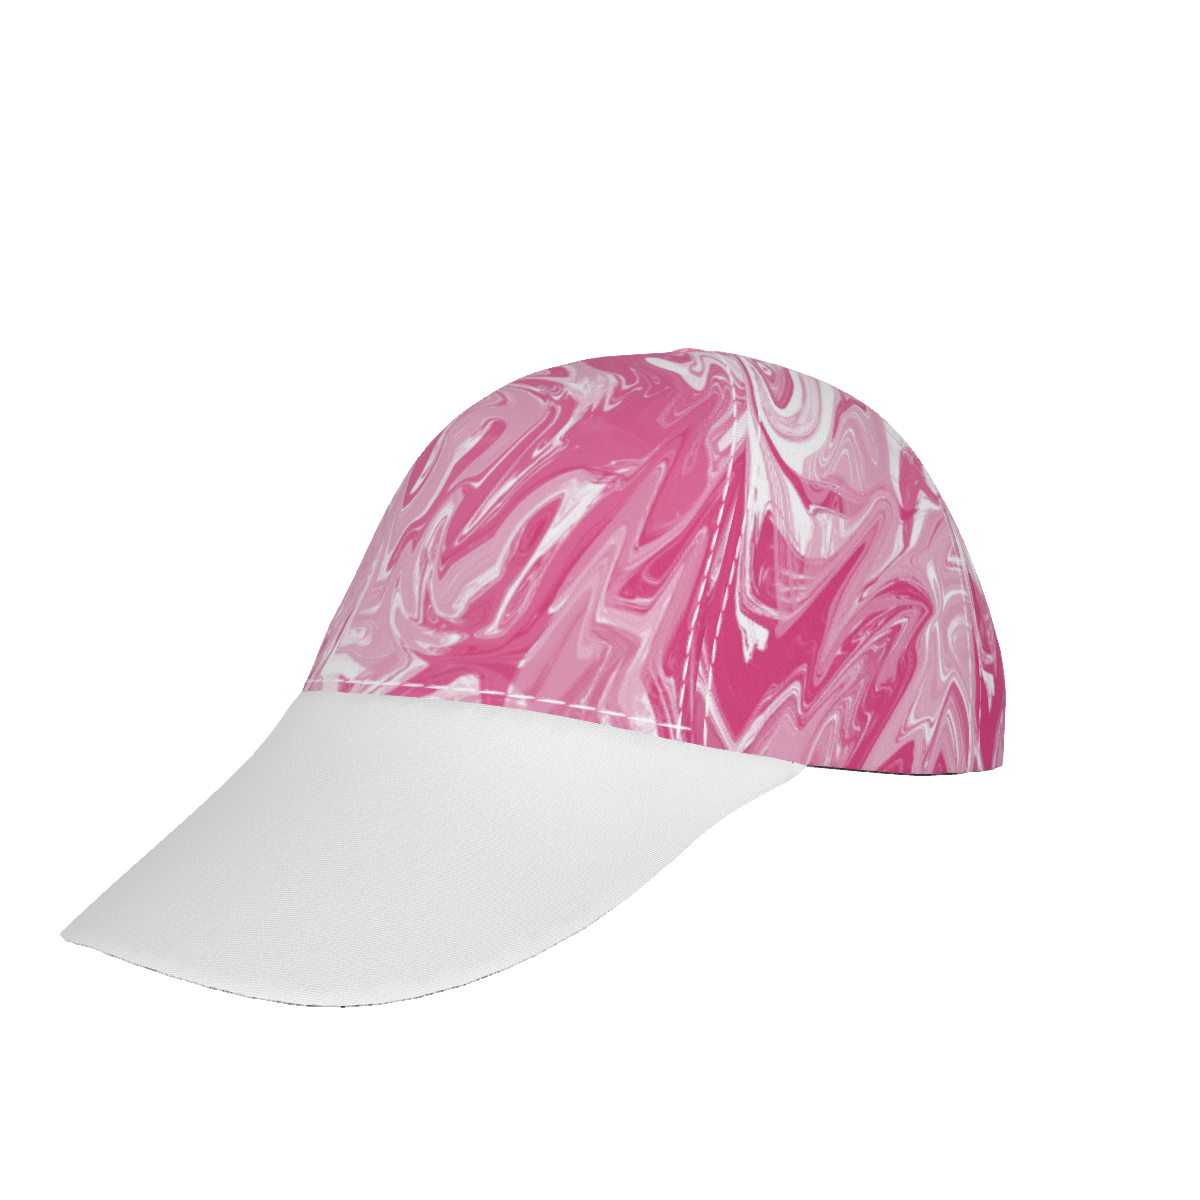 Just Pink Peaked with White Peaked Cap - DromedarShop.com Online Boutique